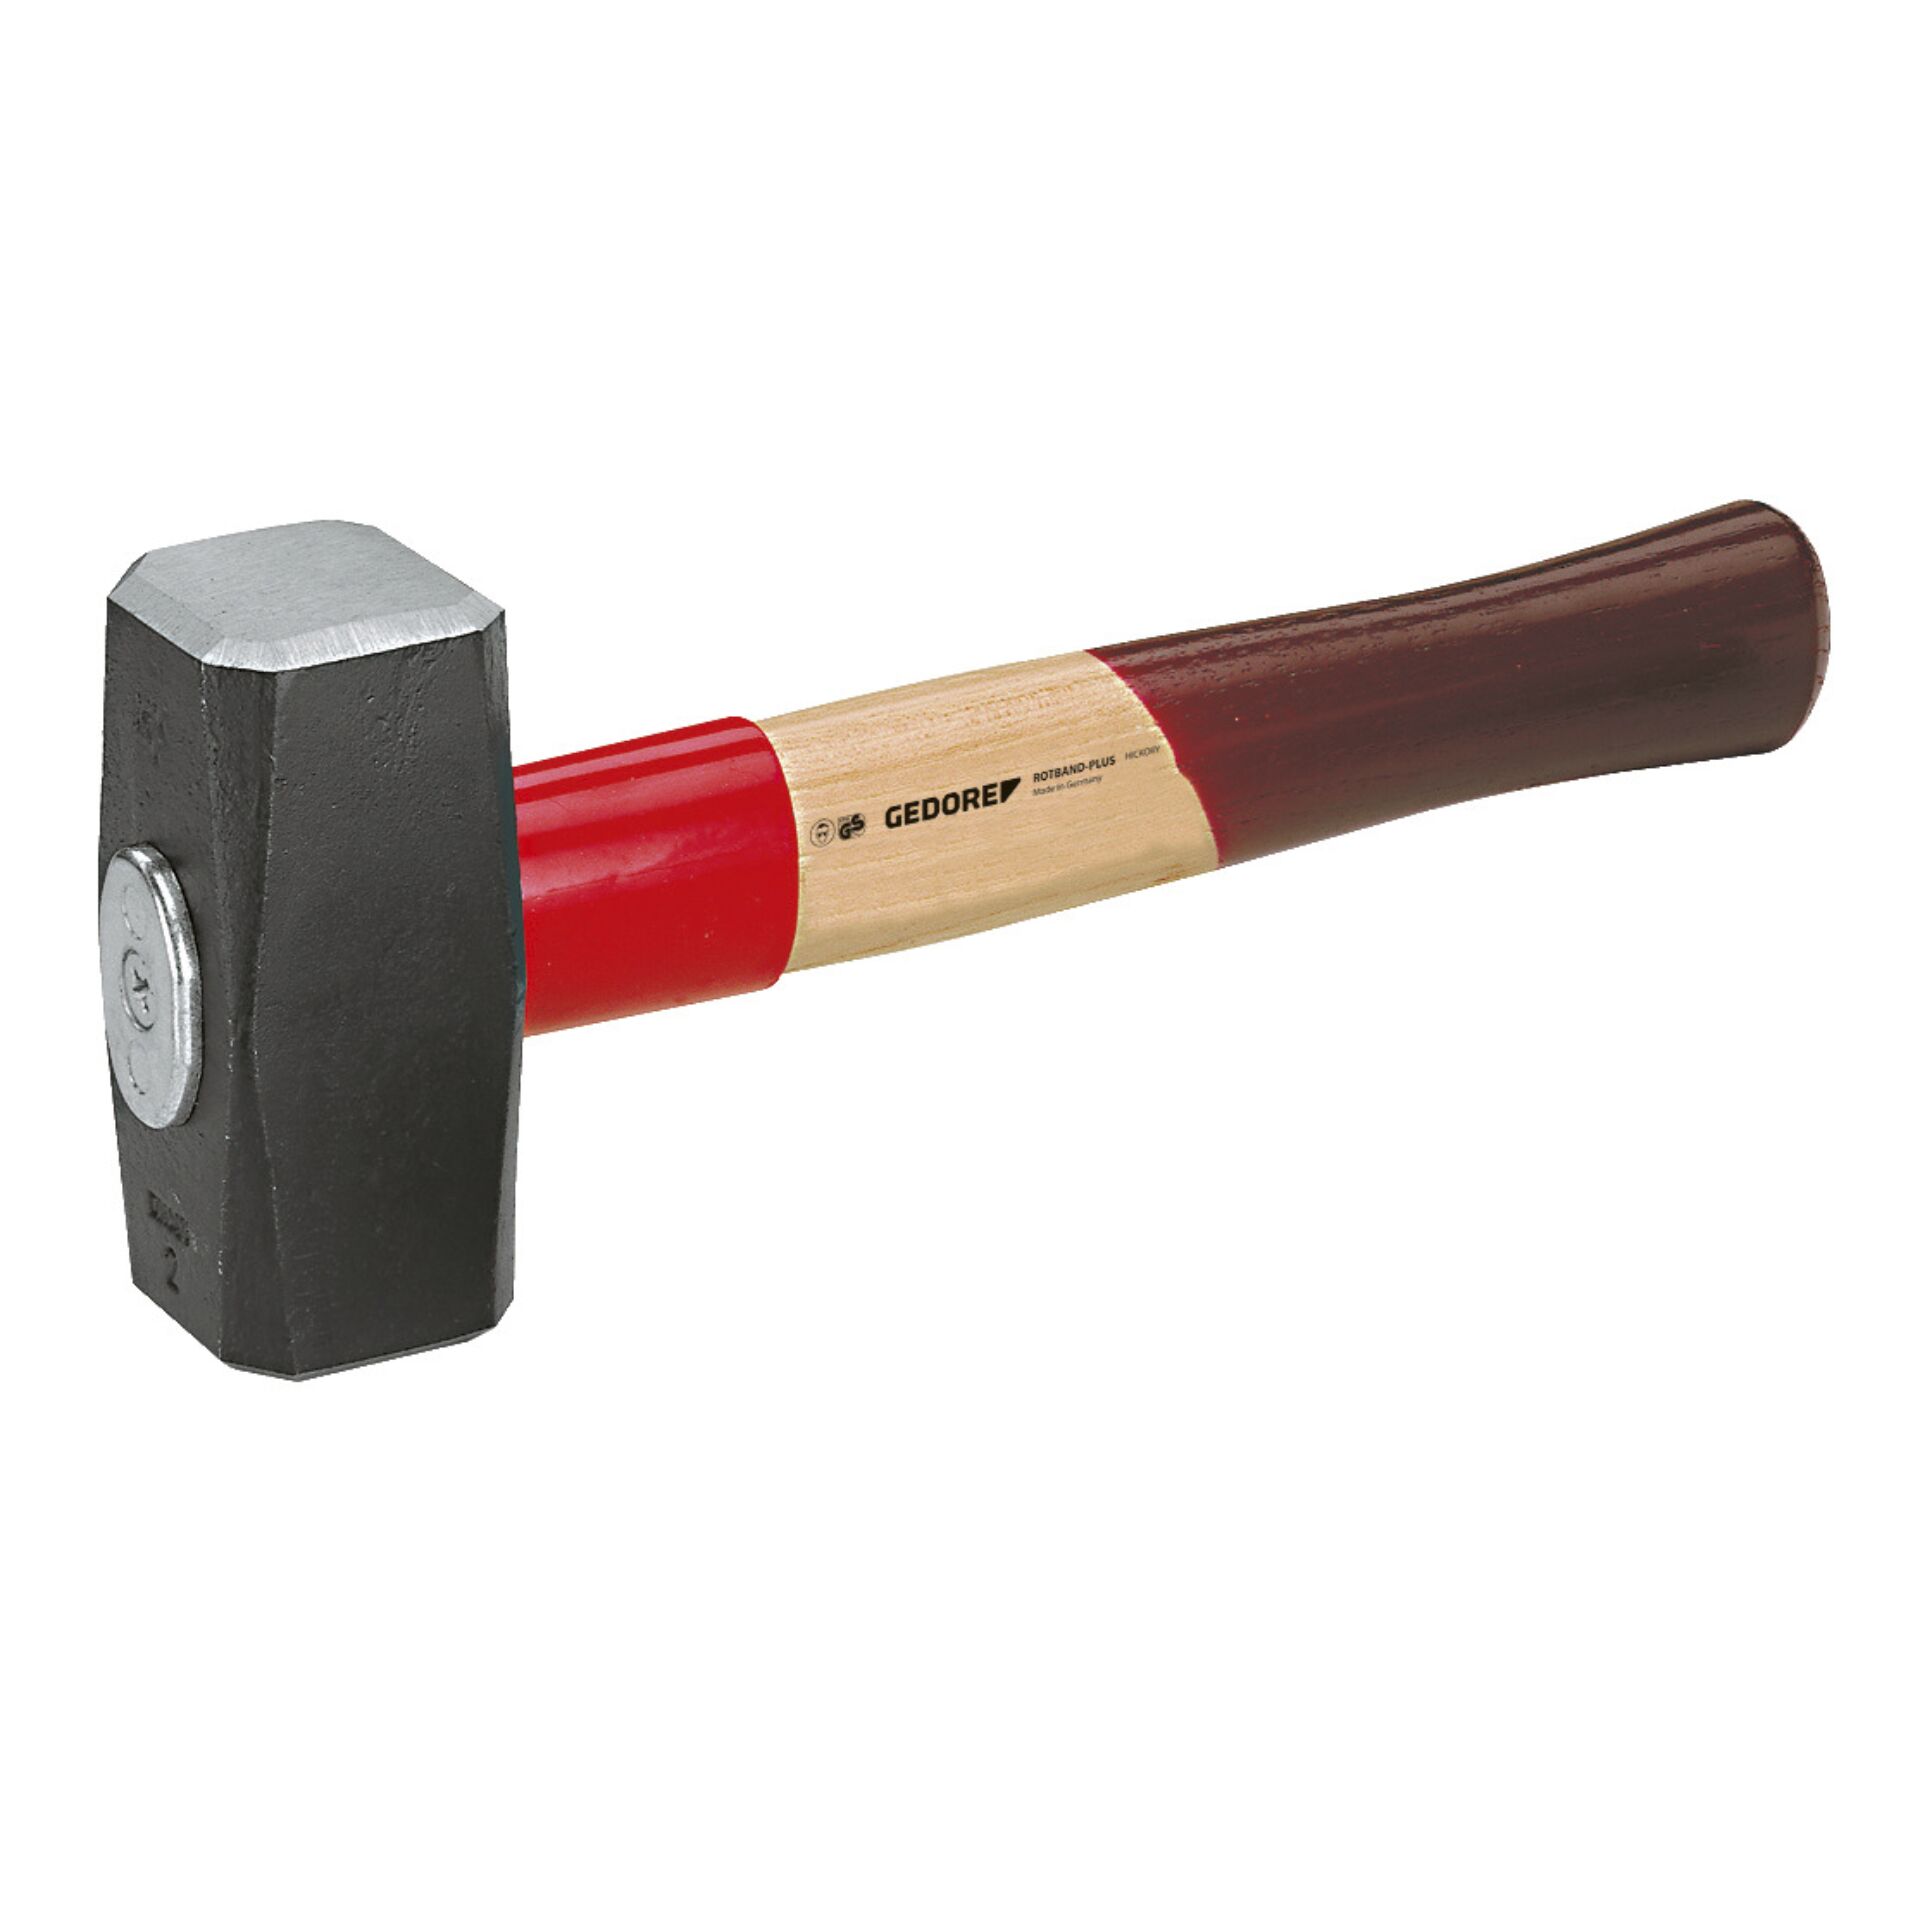 GEDORE Club Hammer ROTBAND-PLUS with Hickory handle 1500 g